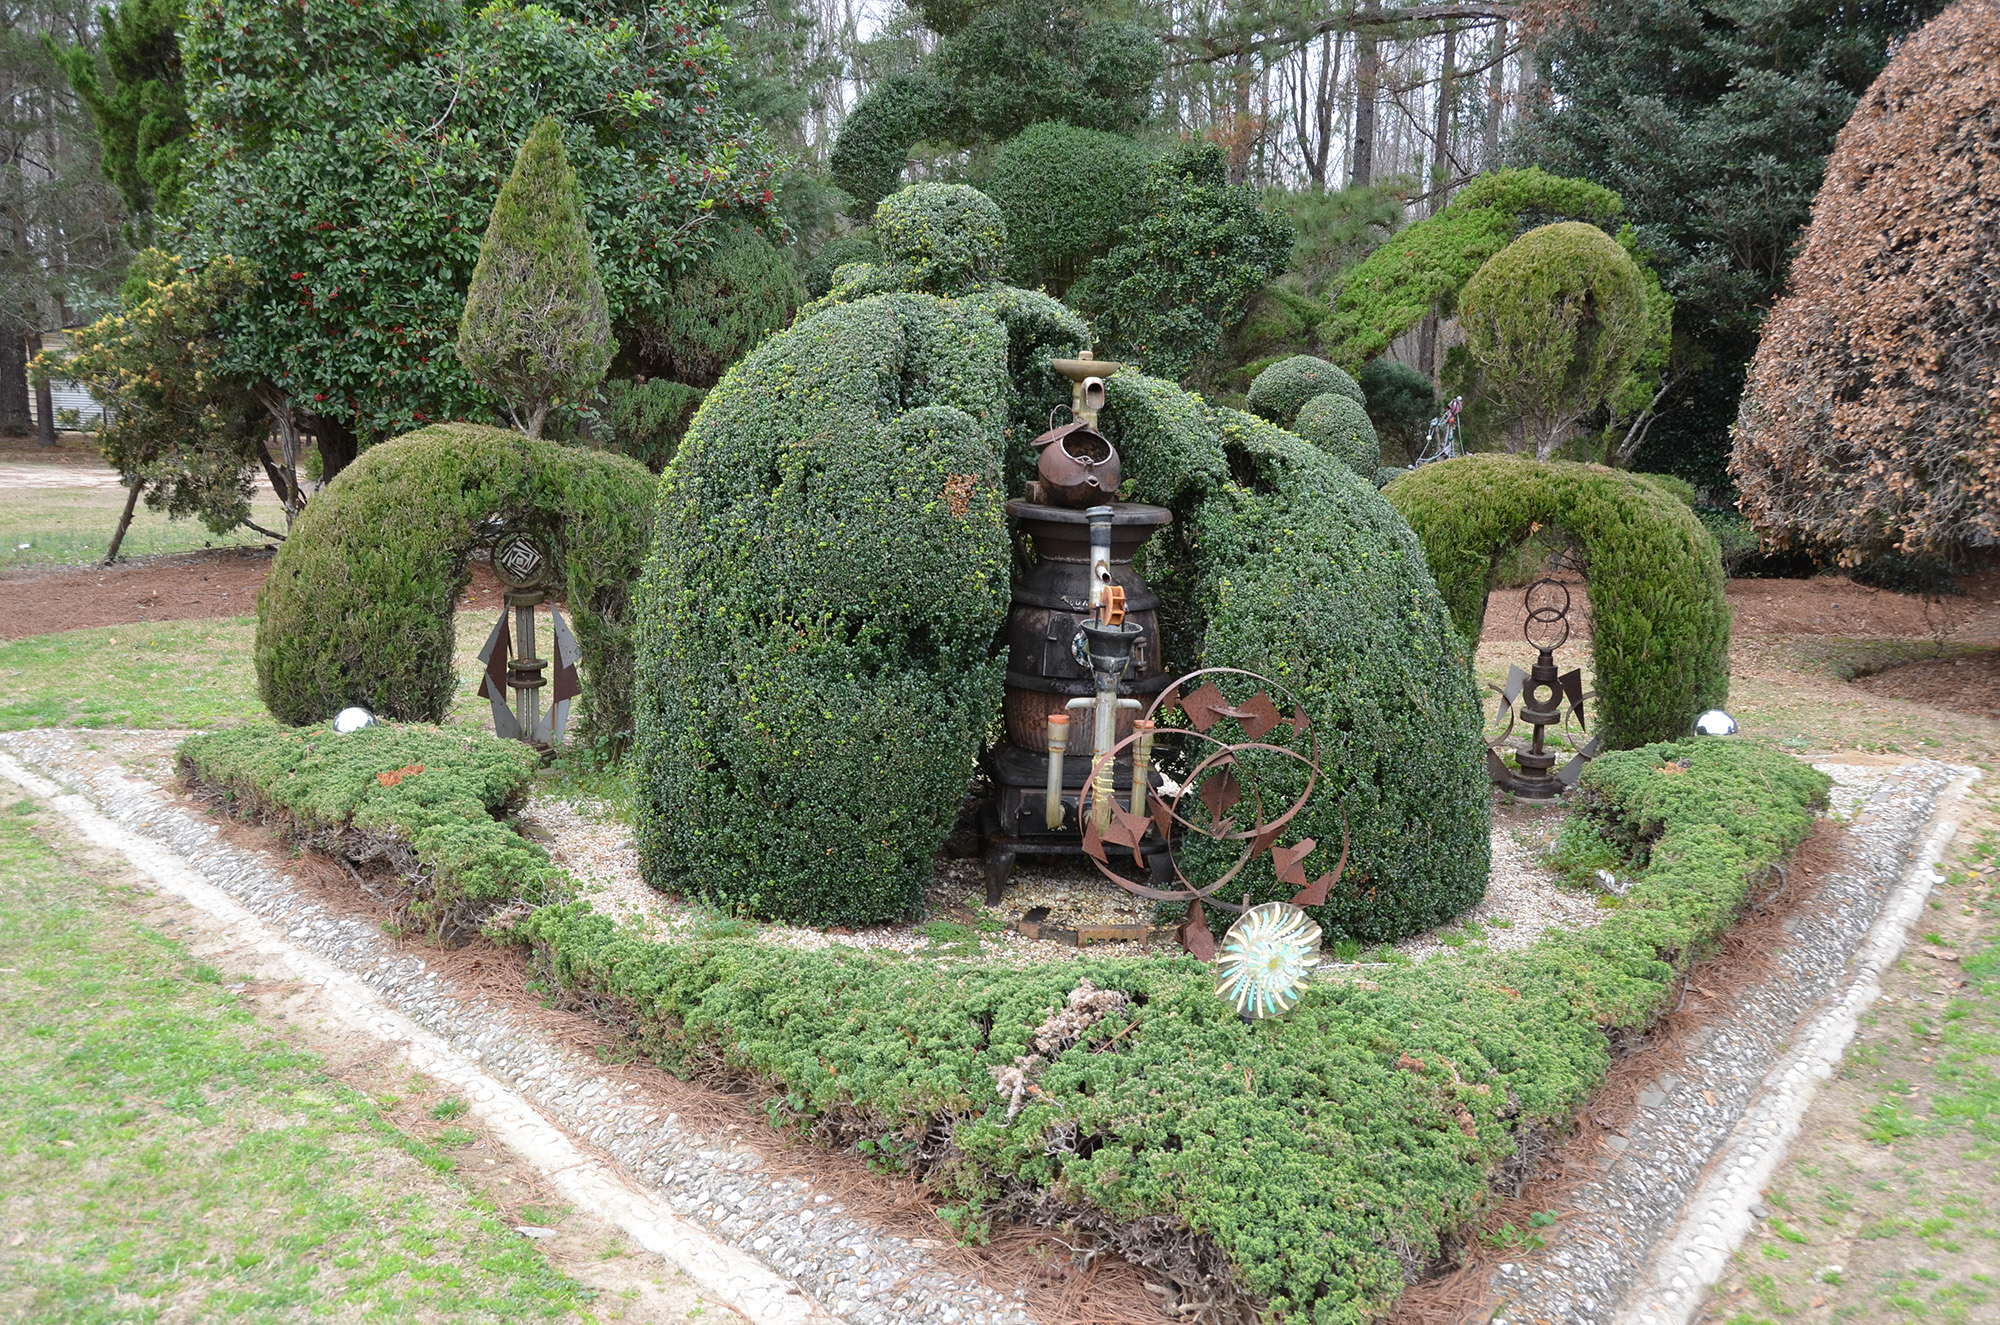 Pearl Fryar Topiary Garden puts Bishopville, S.C., on the picture